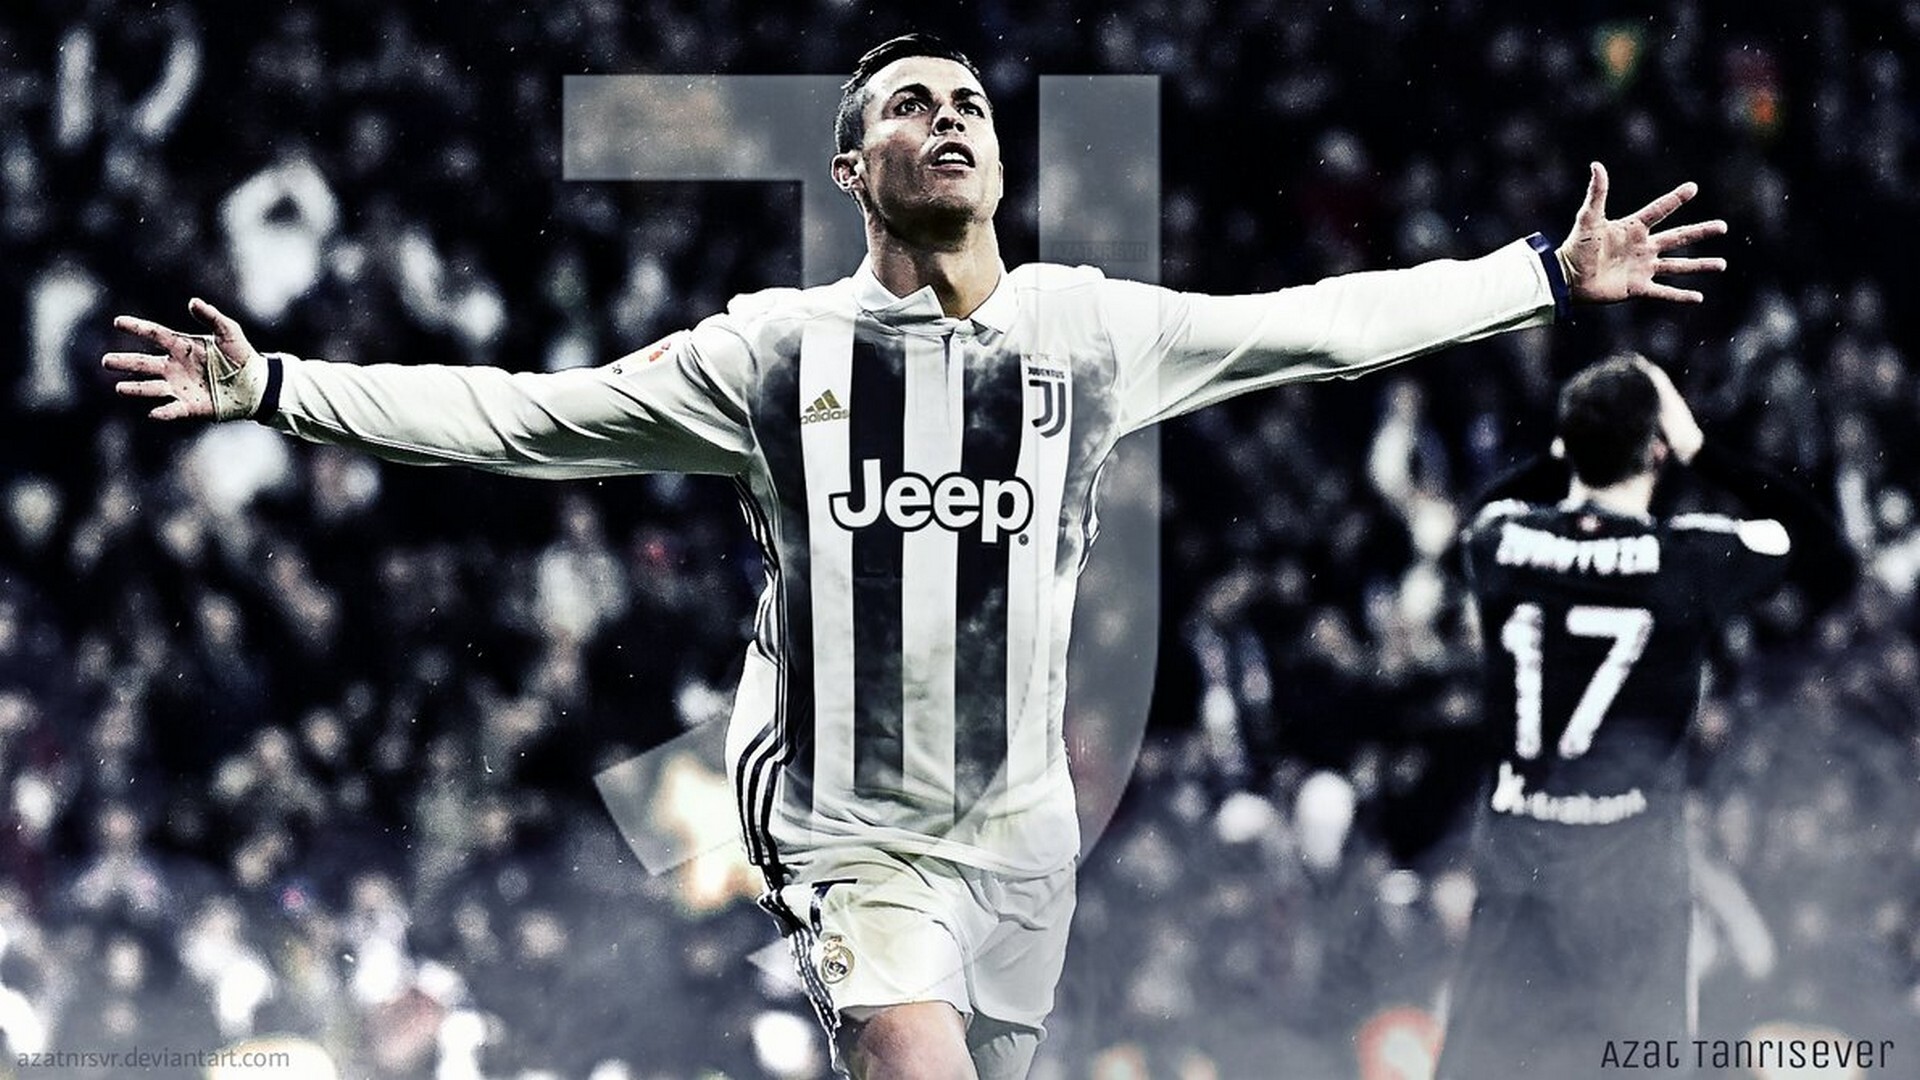 Wallpaper C Ronaldo Juventus Desktop with resolution 1920X1080 pixel. You can use this wallpaper as background for your desktop Computer Screensavers, Android or iPhone smartphones